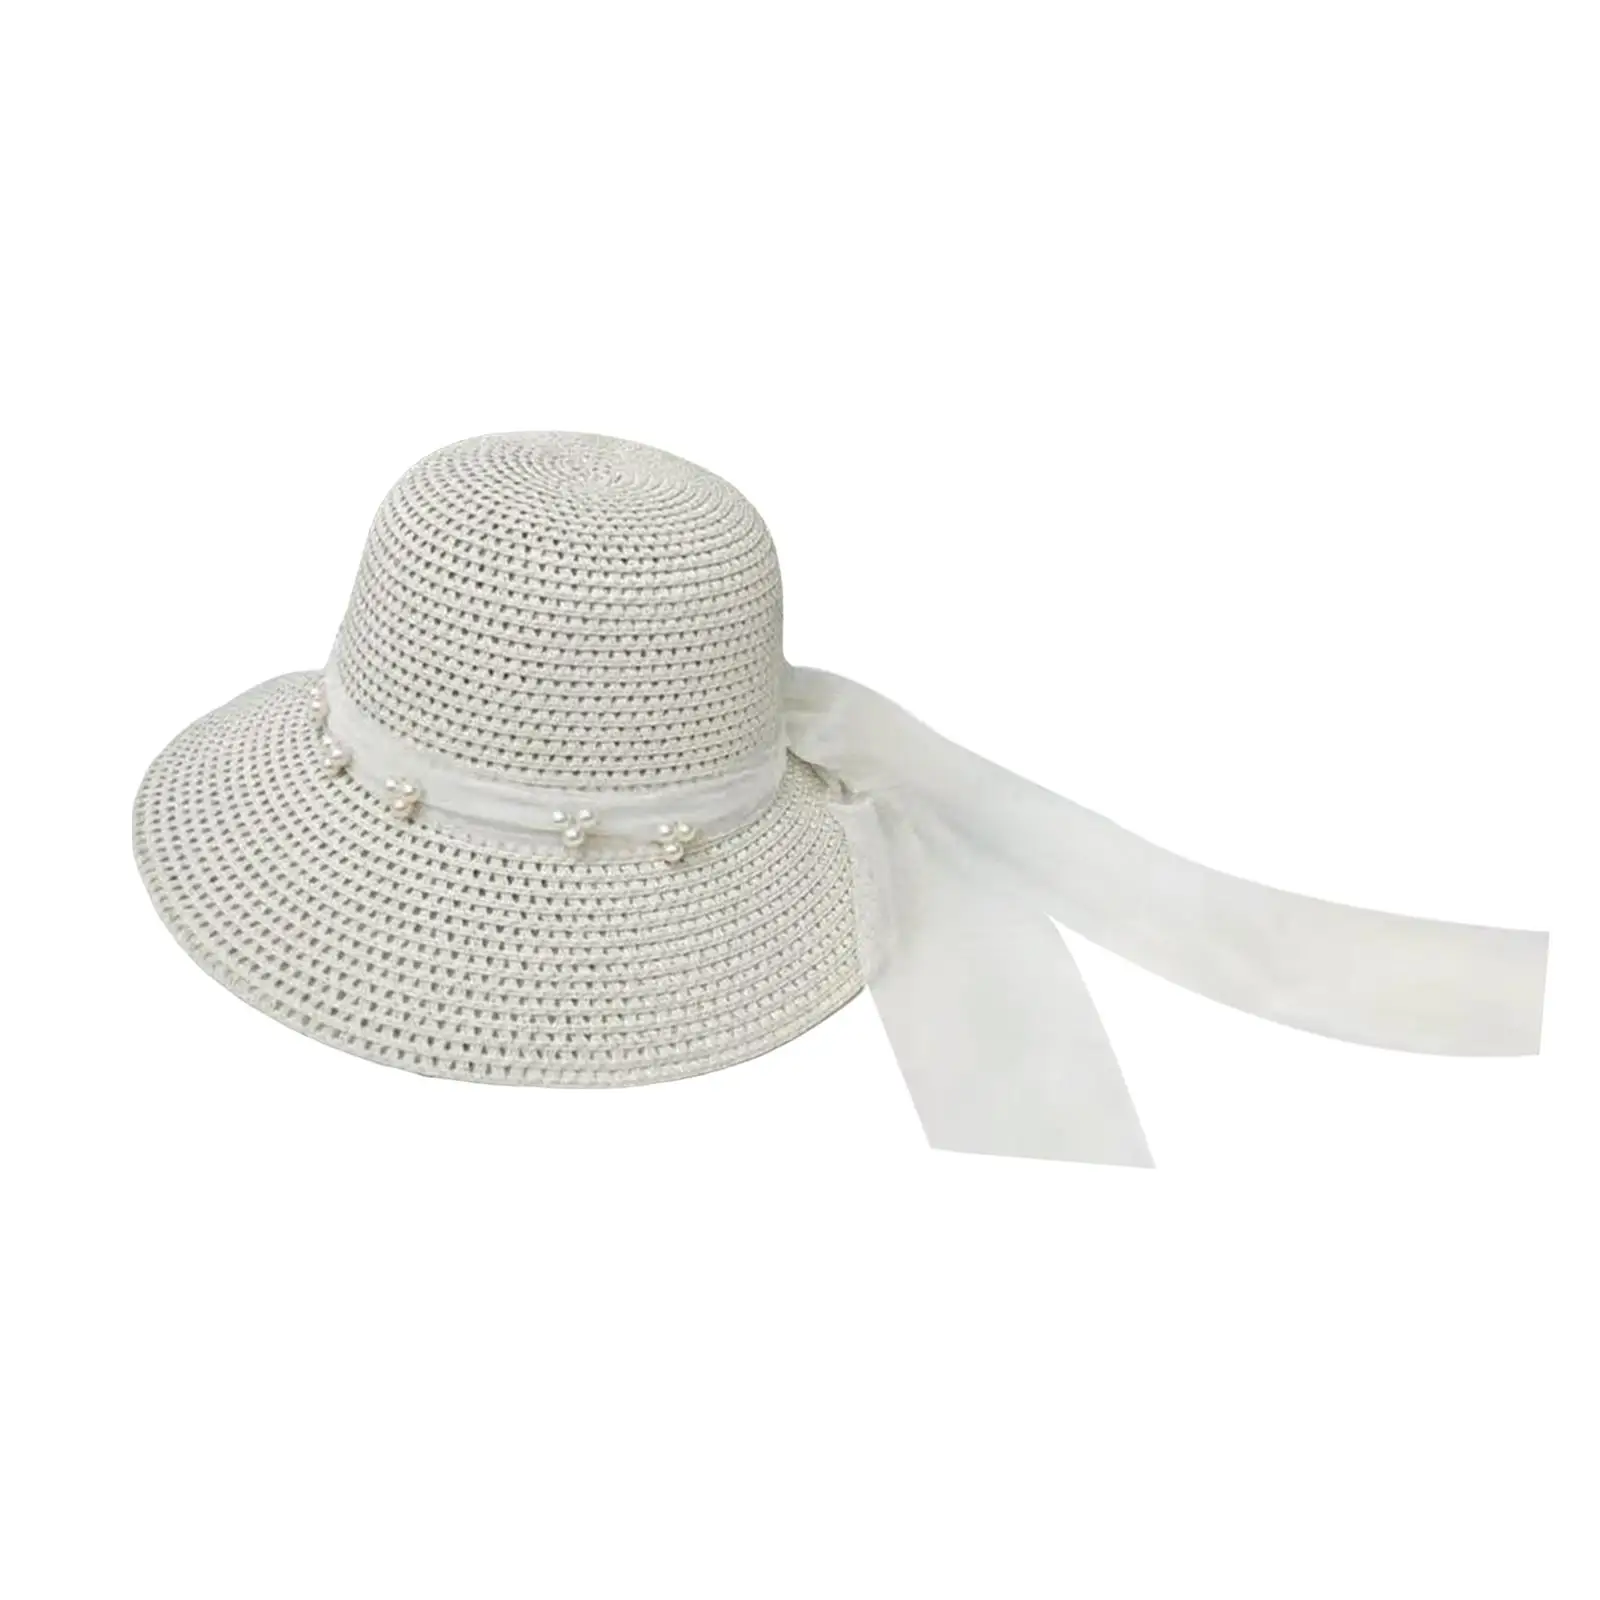 Womens Straw Hats Summer Beach Cap Lightweight Packable Ribbon Tie Wide Brim Visor Hats Bucket Hat for Holiday Vacation Outdoor